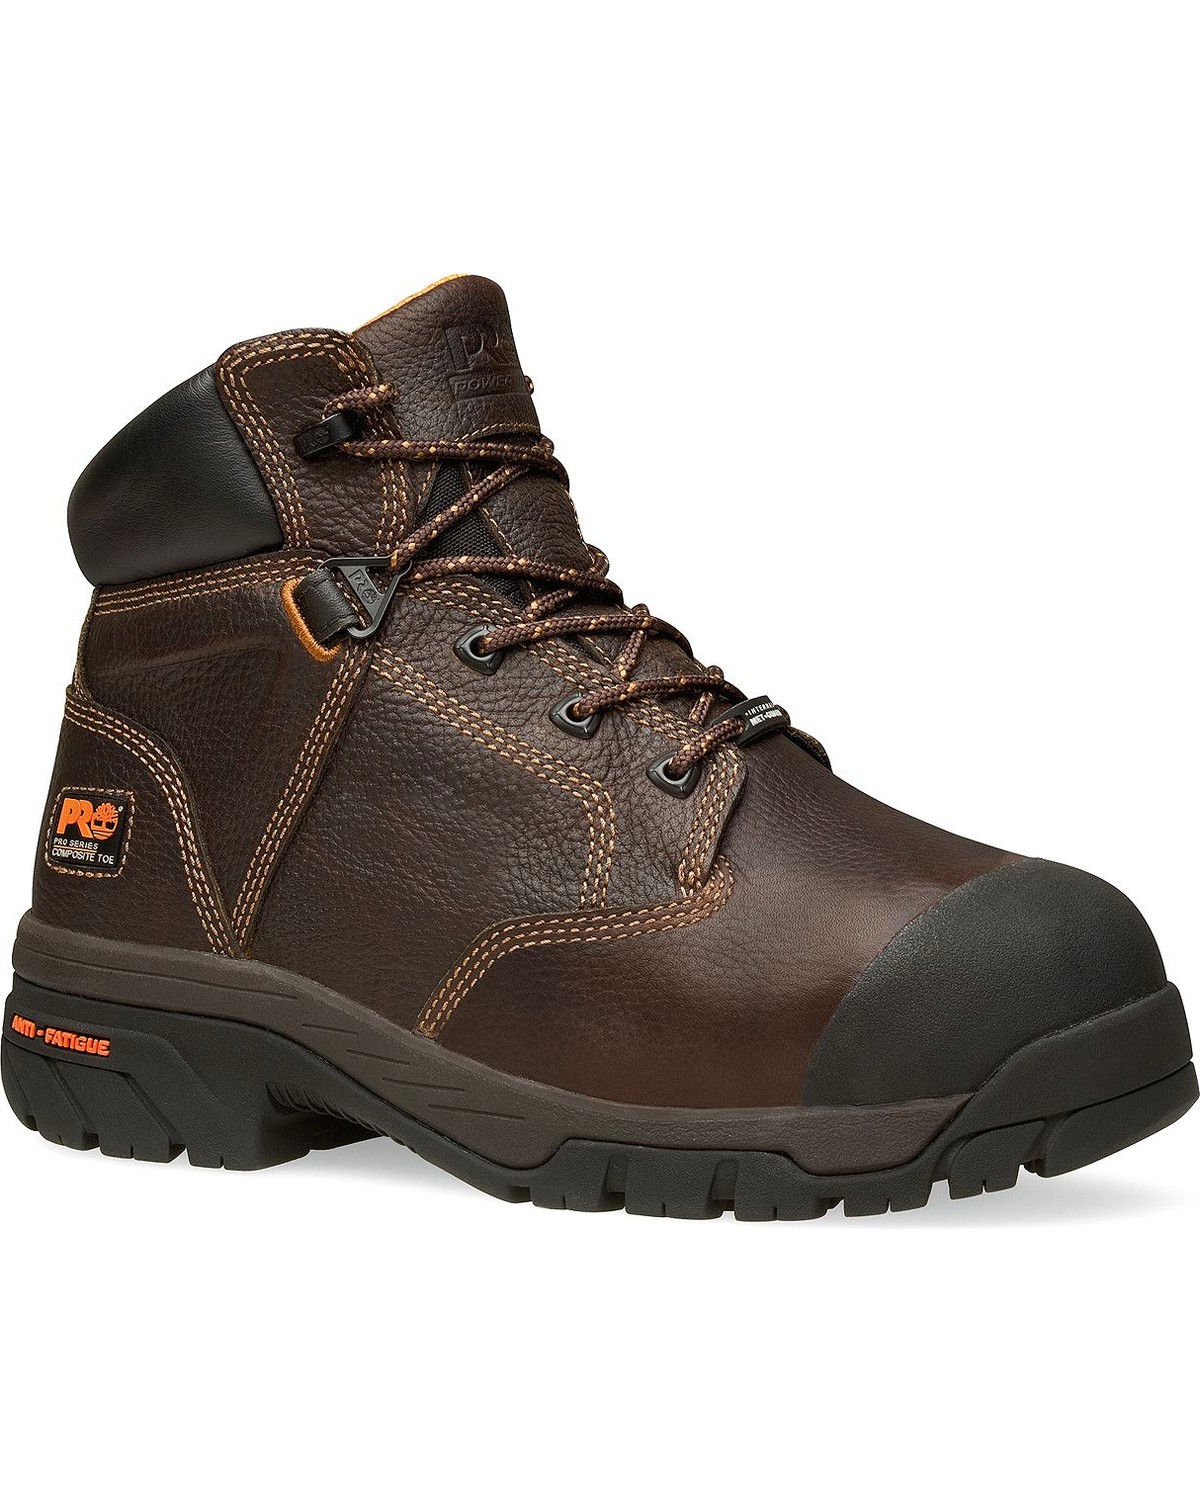 Timberland Pro Helix Metatarsal Guard 6" Lace-Up Work Boots - Composition Toe